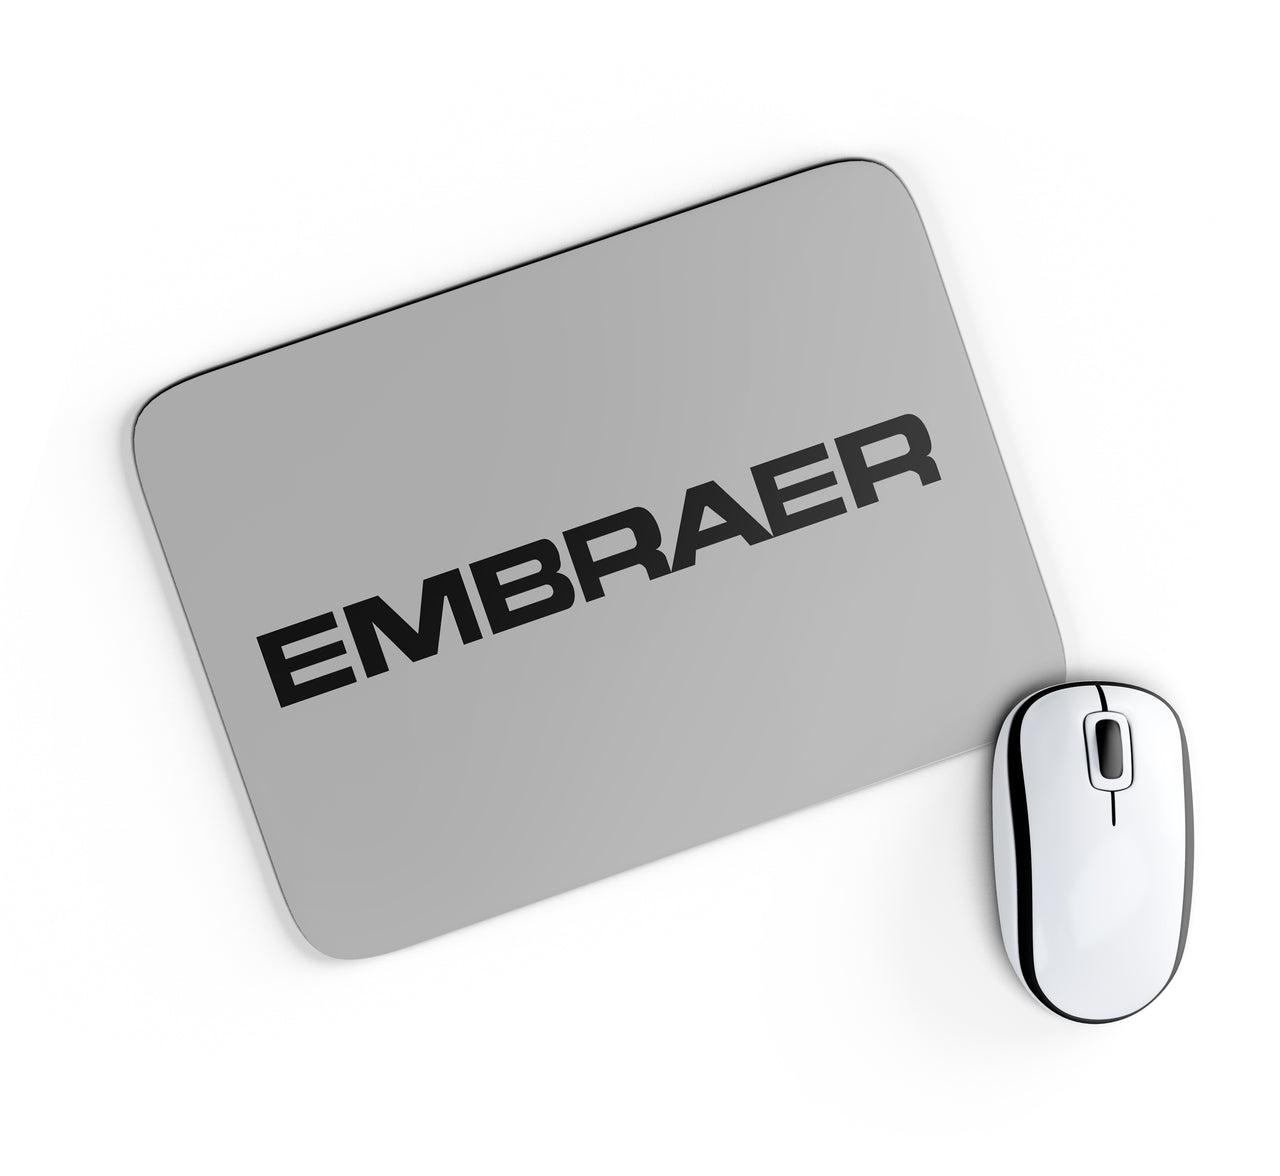 Embraer & Text Designed Mouse Pads